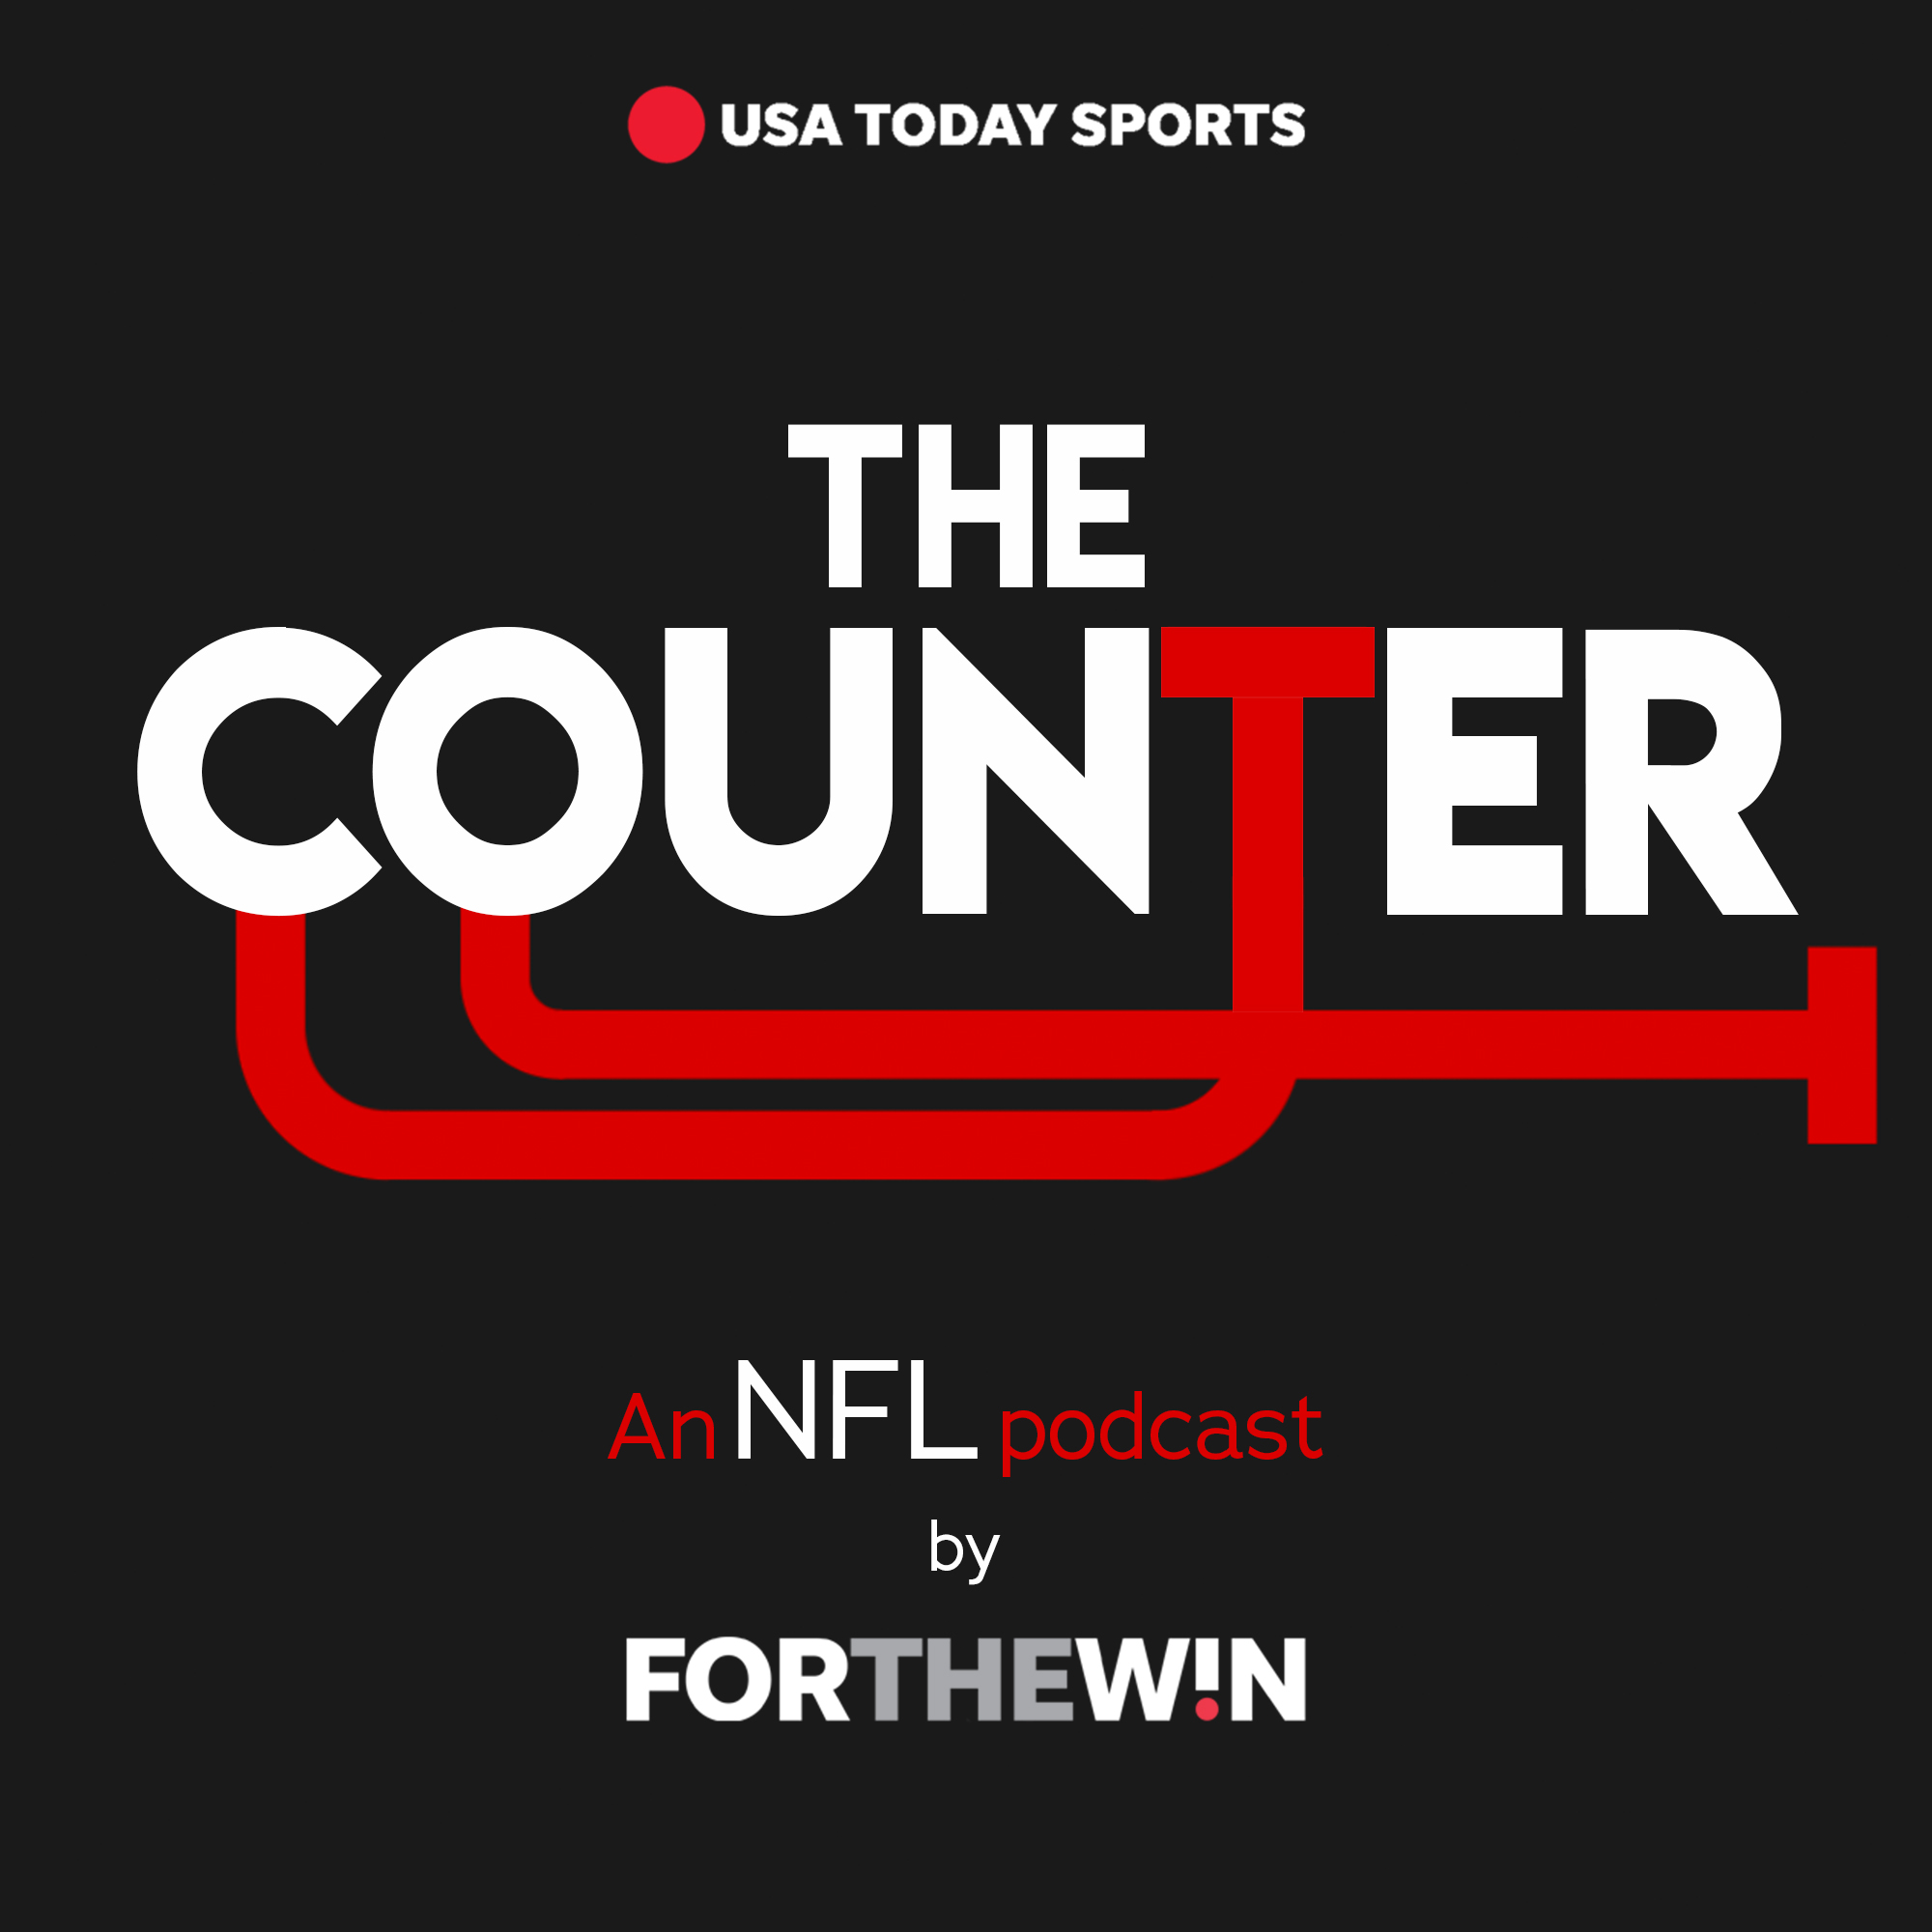 The Counter: An NFL Podcast by For The Win - Tom Brady has won another Super Bowl, What happened to Patrick Mahomes?